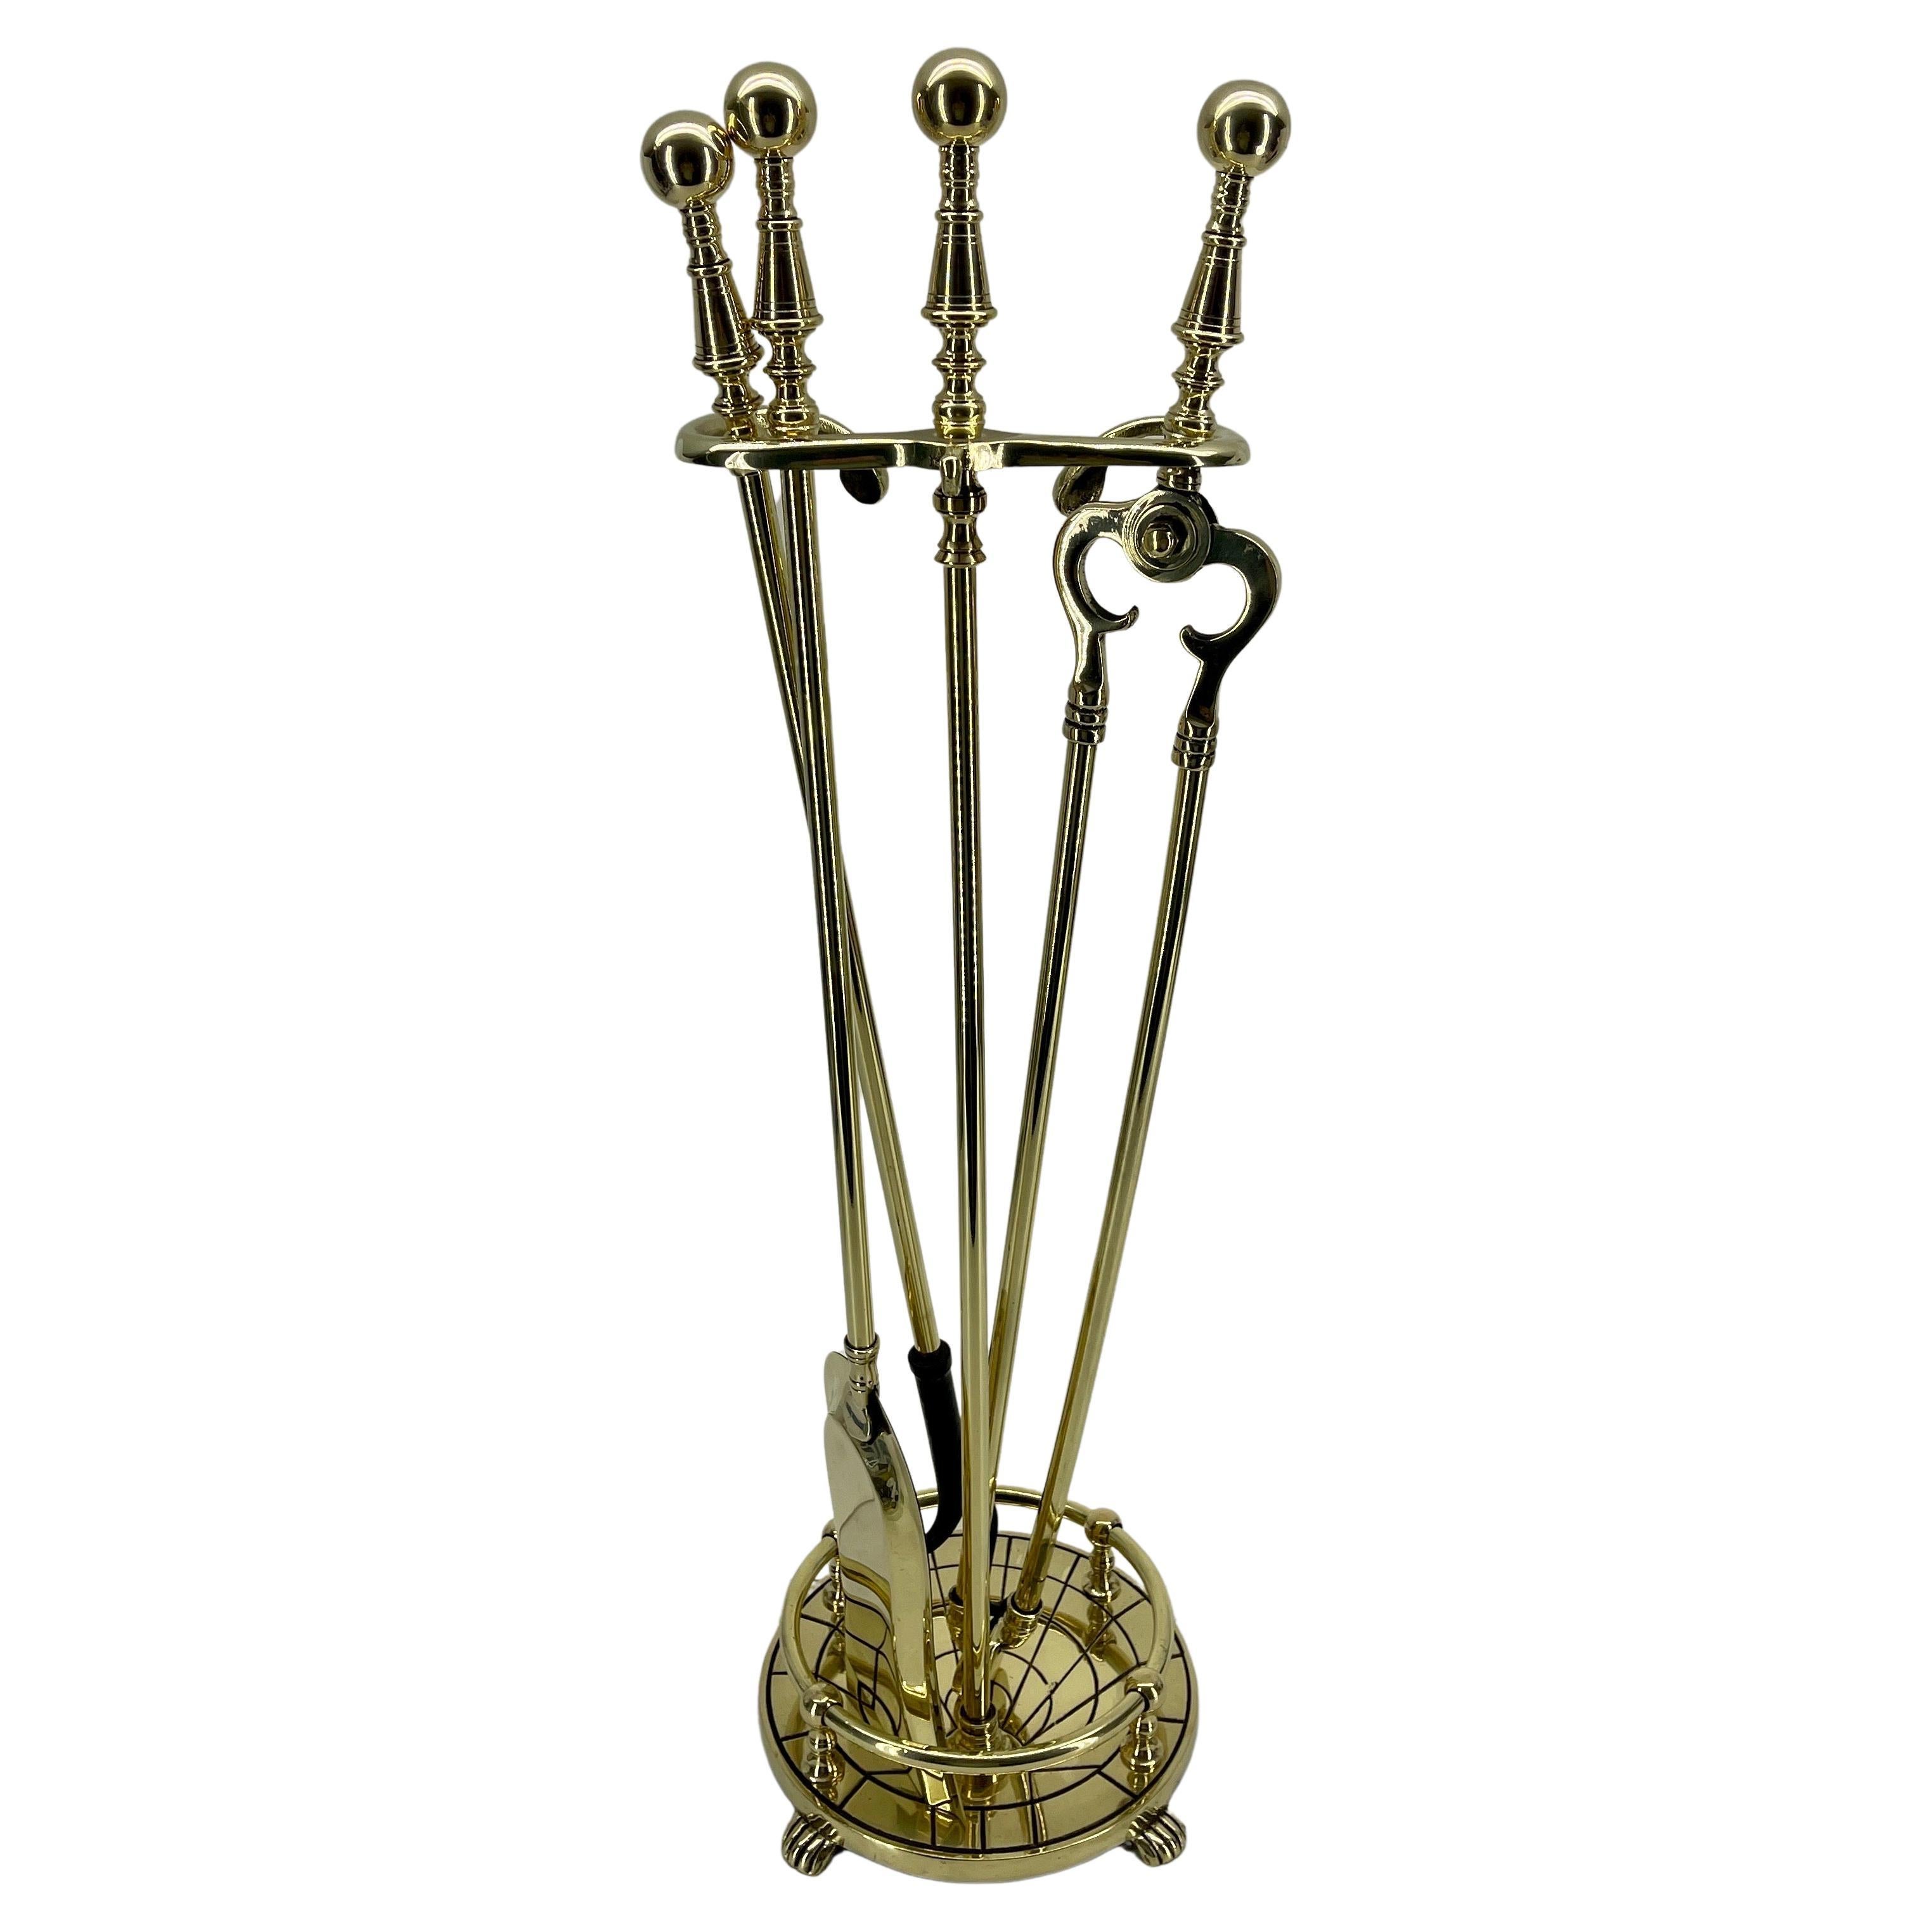 American 3 Piece Set of Brass Fireplace Tools with Spider Web Decor In Good Condition For Sale In Haddonfield, NJ